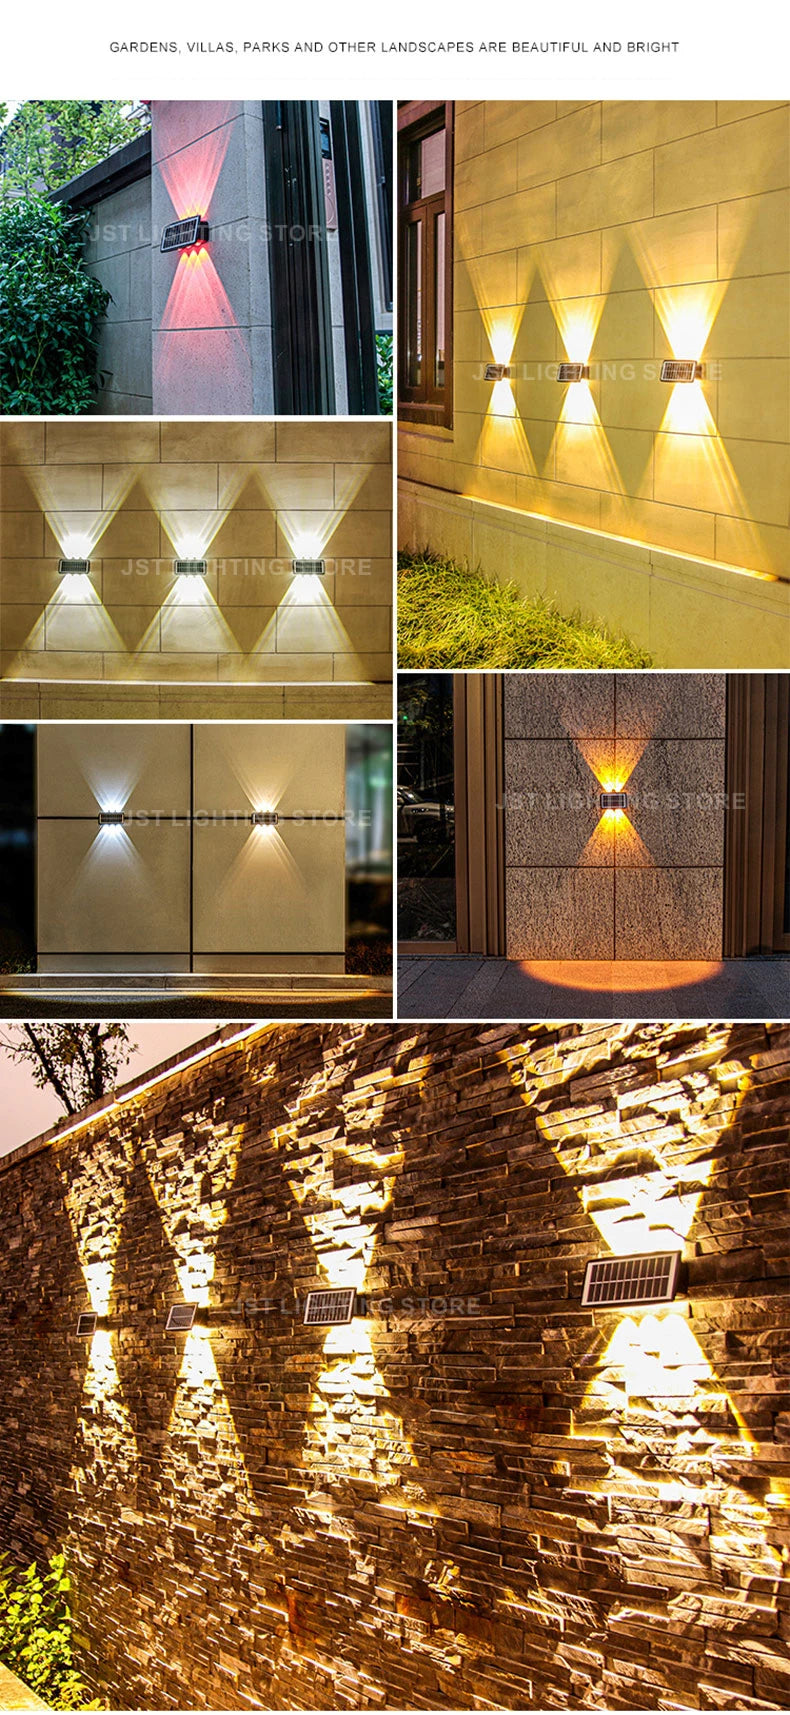 Solar LED Wall Light, Elevate outdoor spaces with solar-powered LED wall lights, perfect for gardens, villas, and parks.